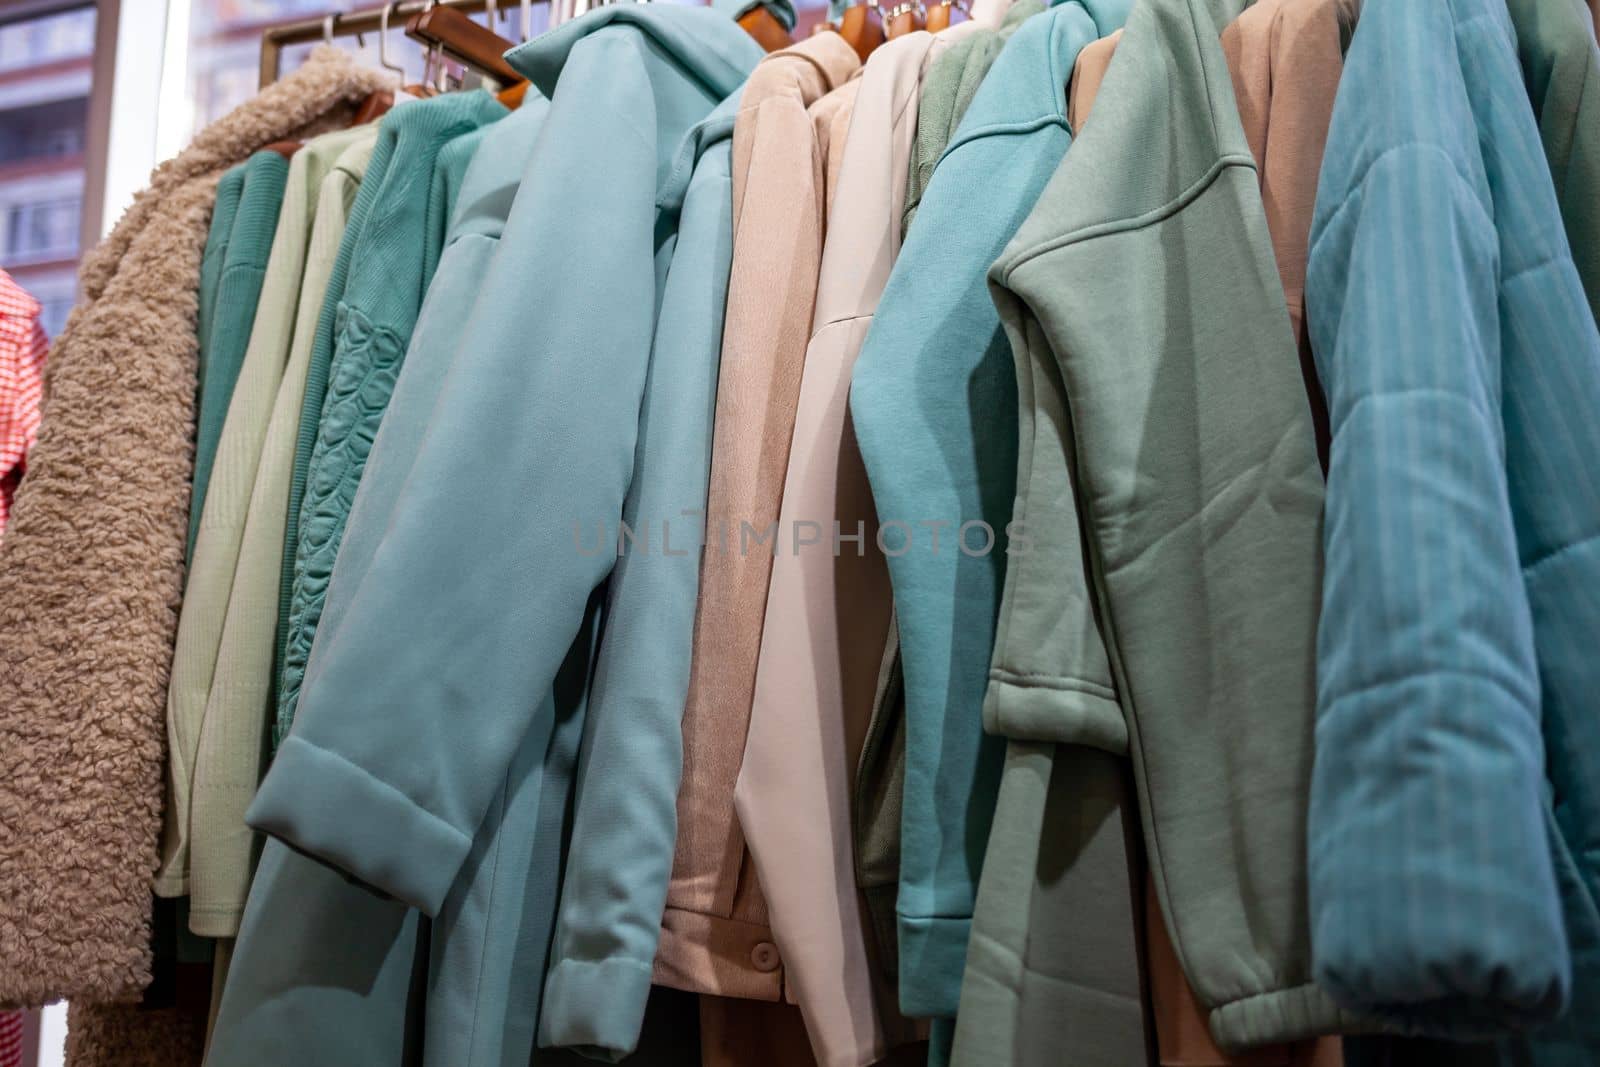 Colorful women's dresses, jackets, trousers and other clothes on hangers in a retail store. The concept of fashion and shopping. Women's clothing boutique.